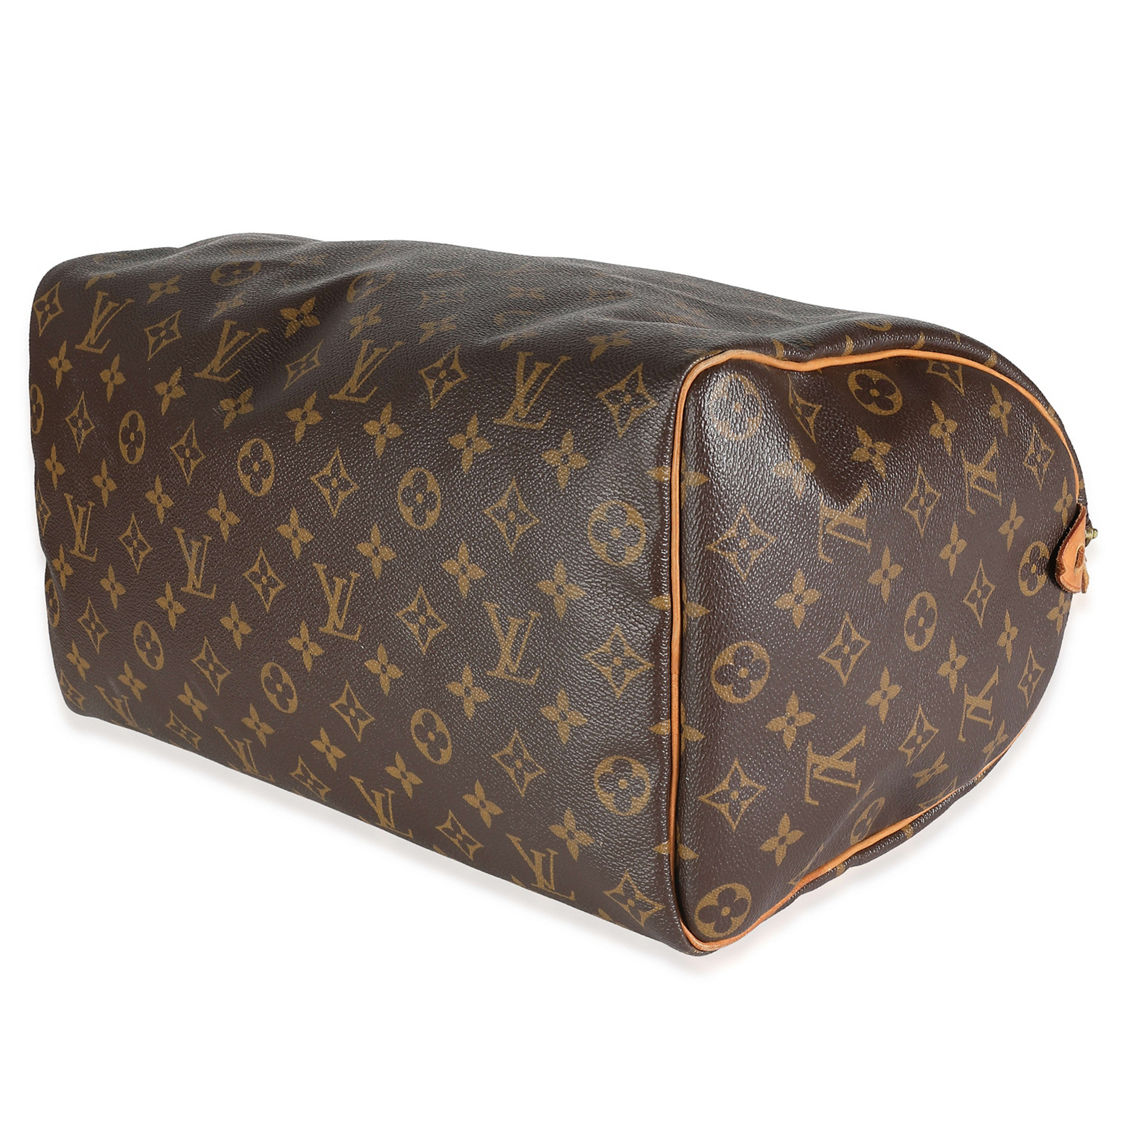 Louis Vuitton Speedy 35 Pre-Owned - Image 3 of 4